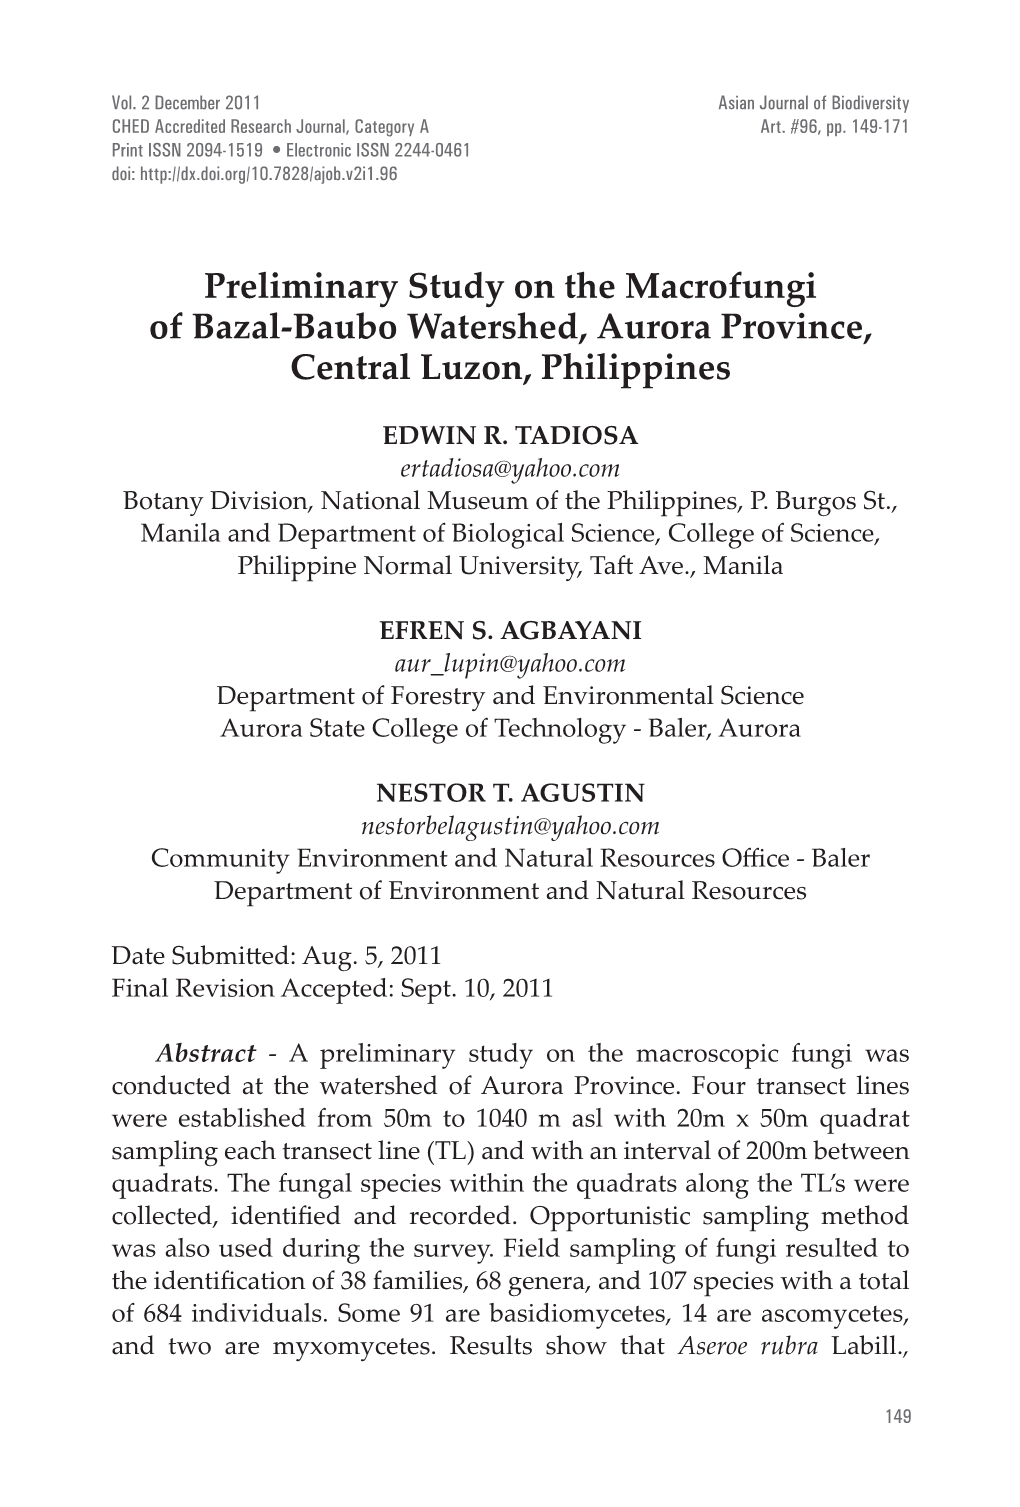 Preliminary Study on the Macrofungi of Bazal-Baubo Watershed, Aurora Province, Central Luzon, Philippines